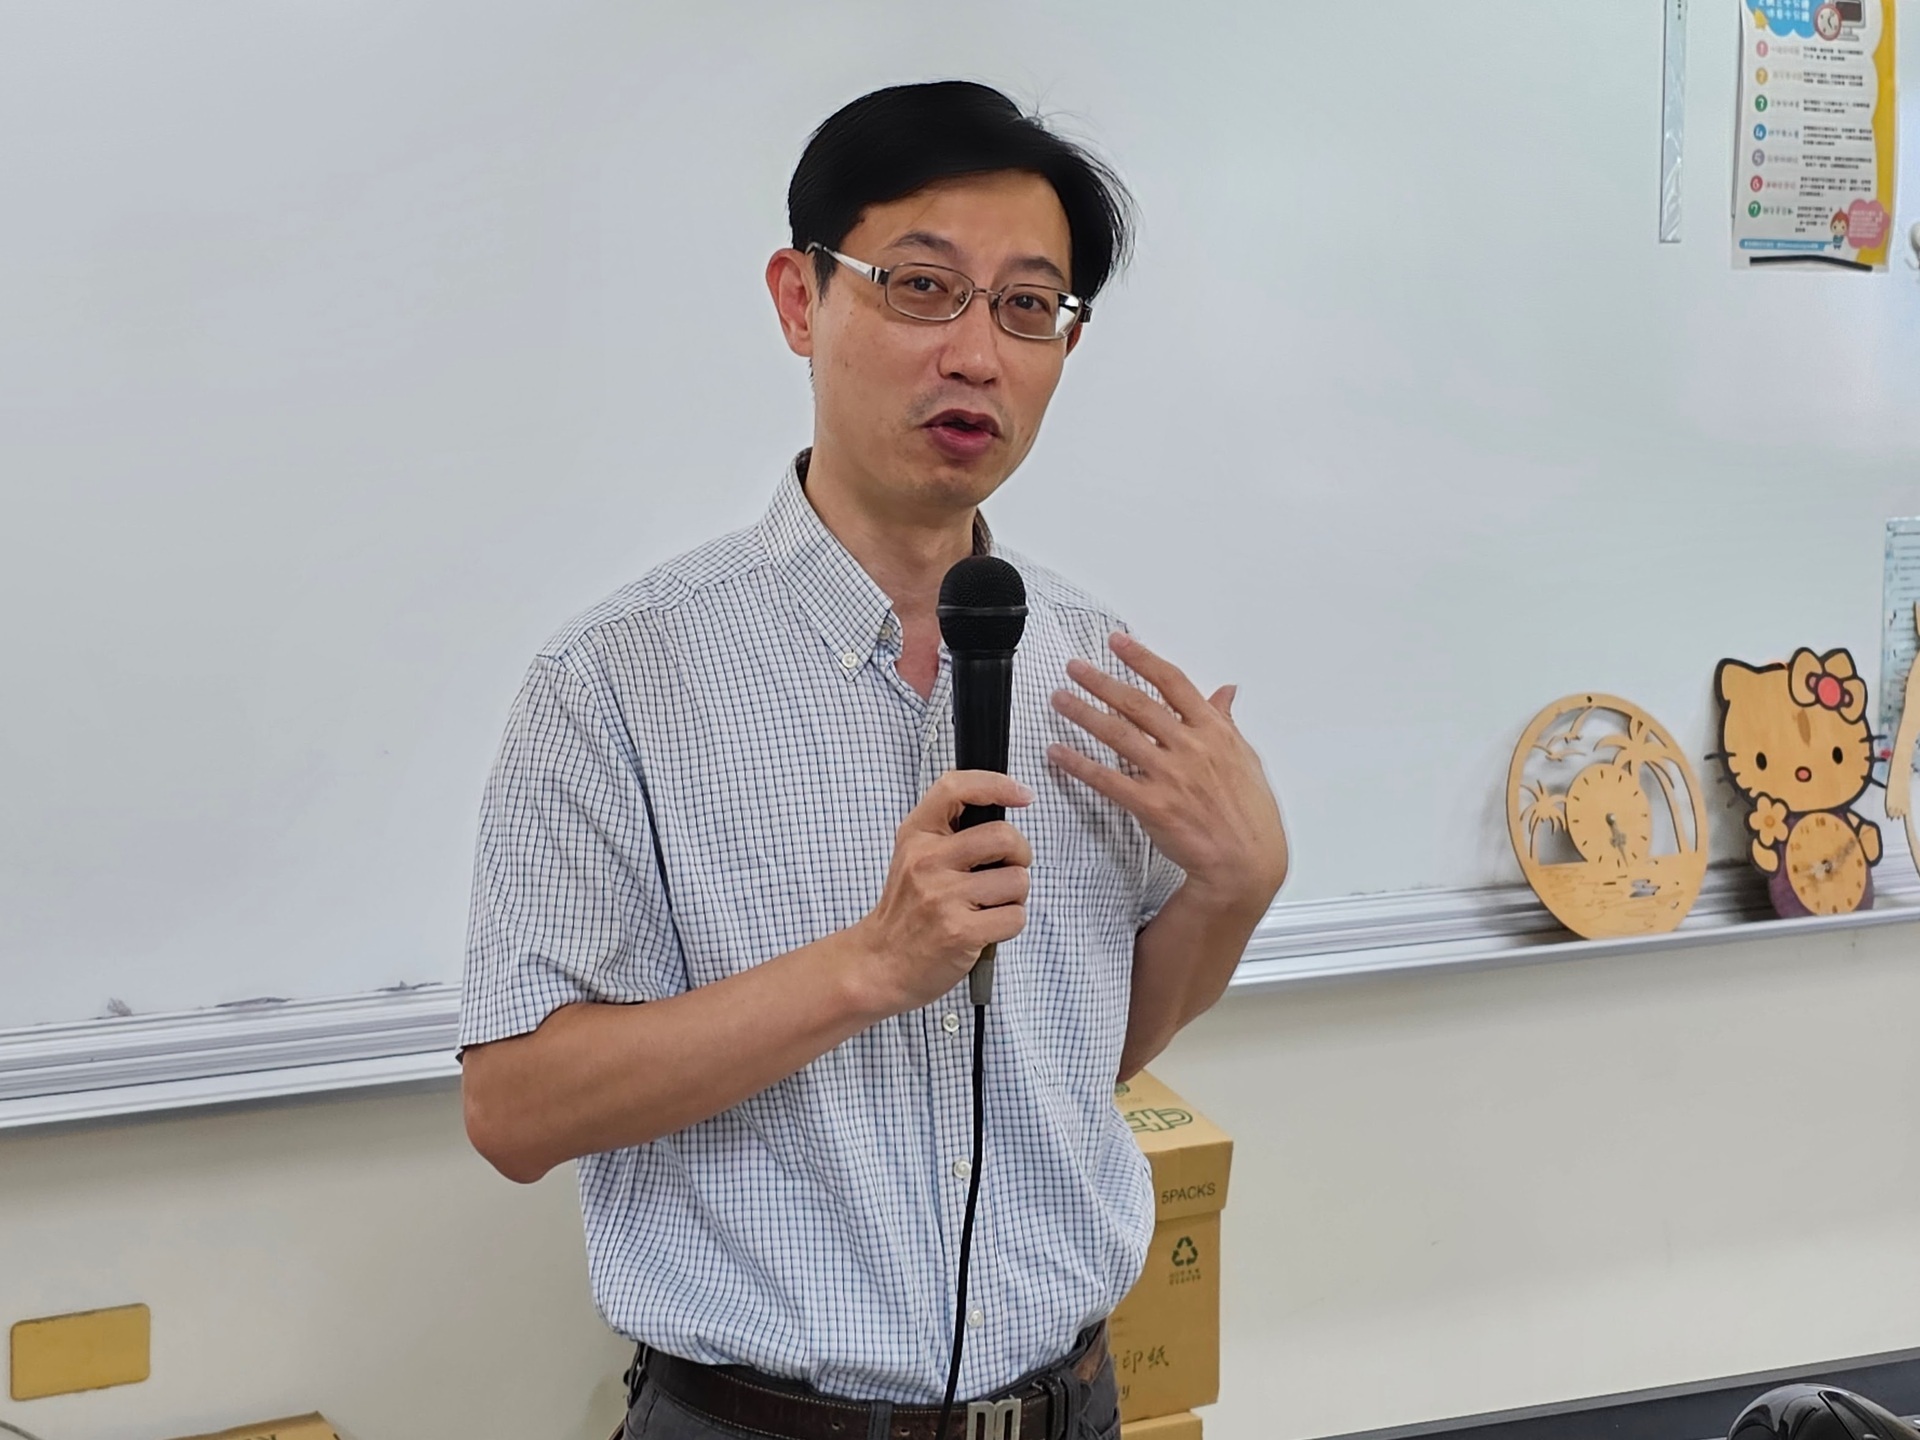 At the Open Day, Associate Professor Jin-Zhong Yu from the Department of Applied Physics leads the "Rope Waves and LED Illumination Science Experiments" session.